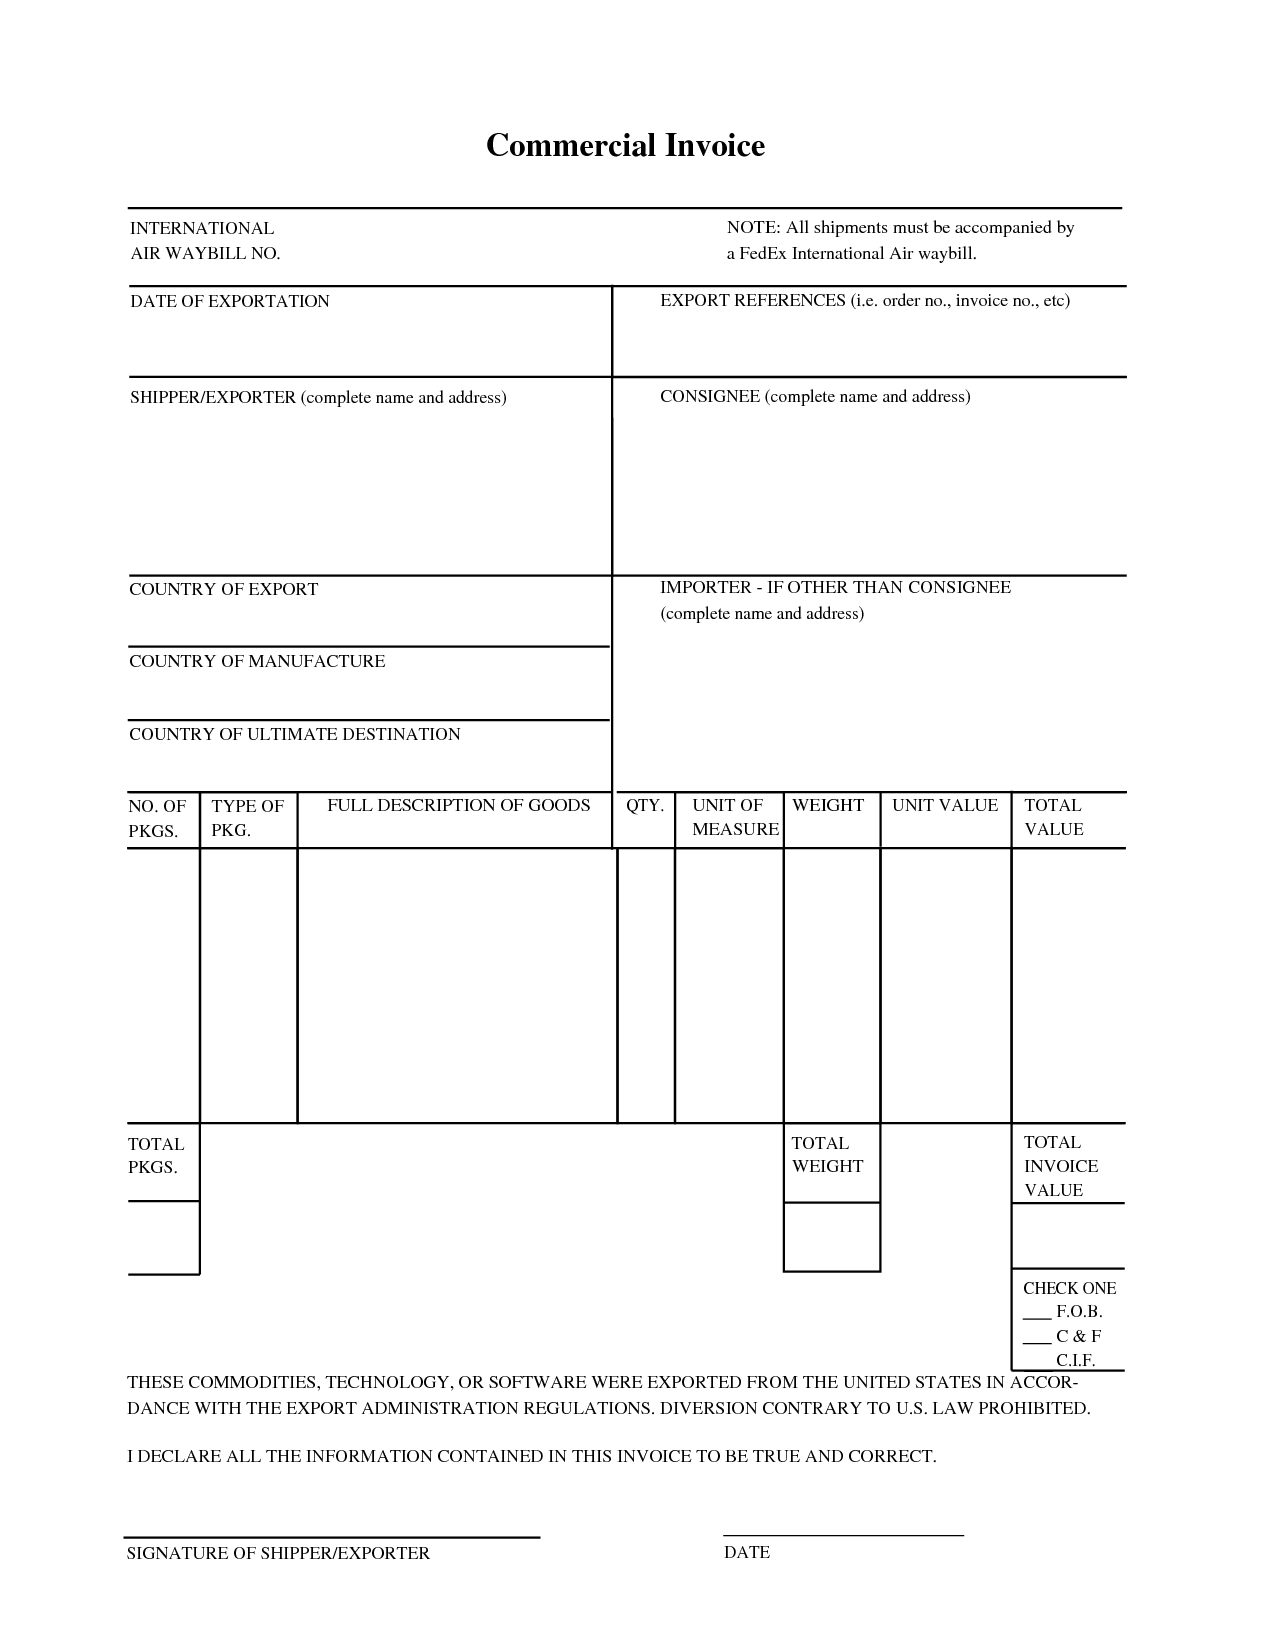 fedex commercial invoice template 68452813 blank commercial invoice pdf